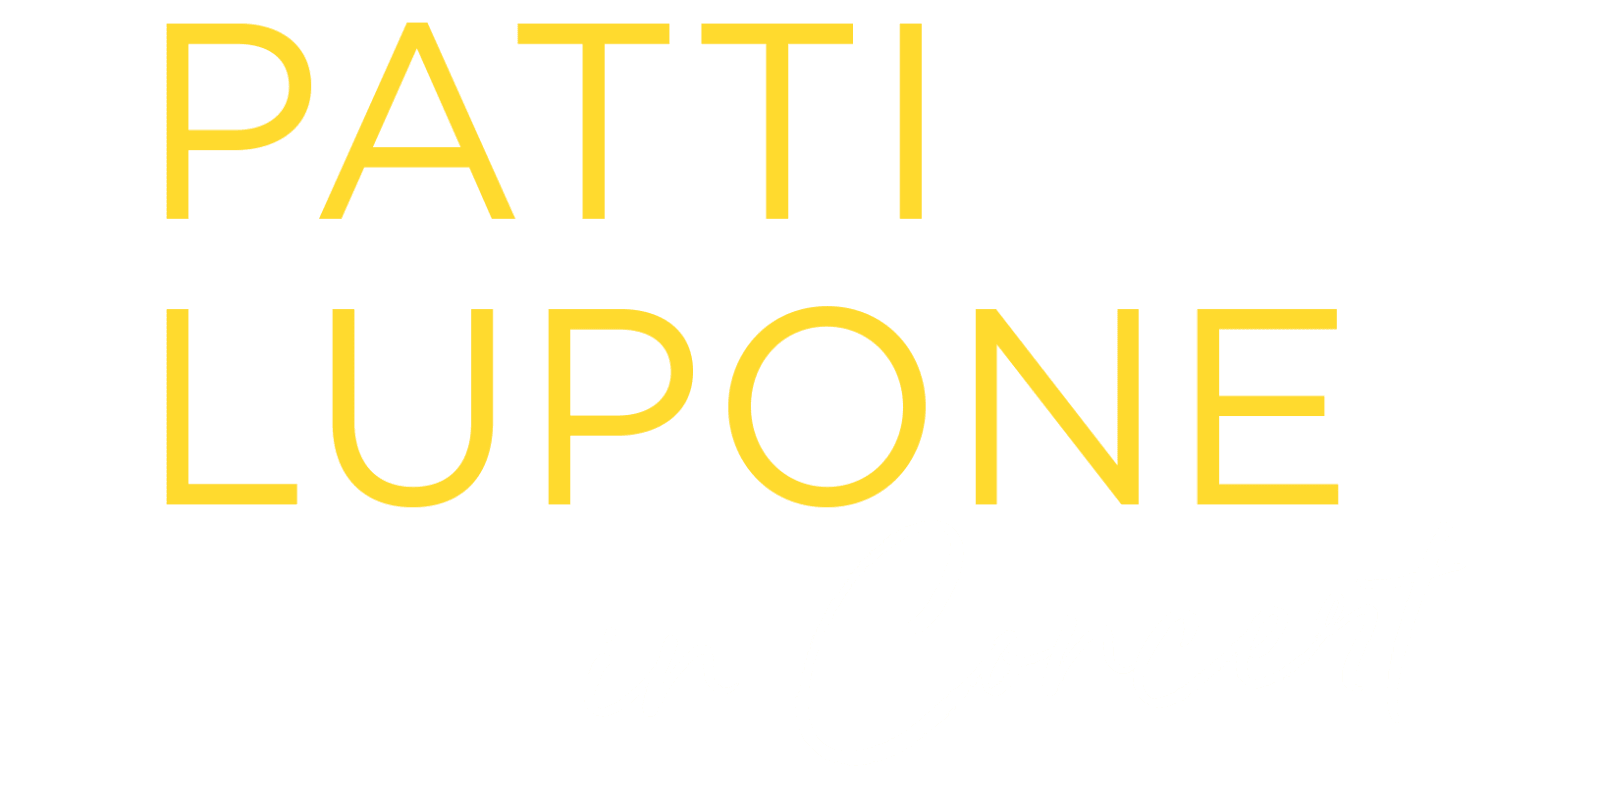 Artwork for Patti Lupone in Concert